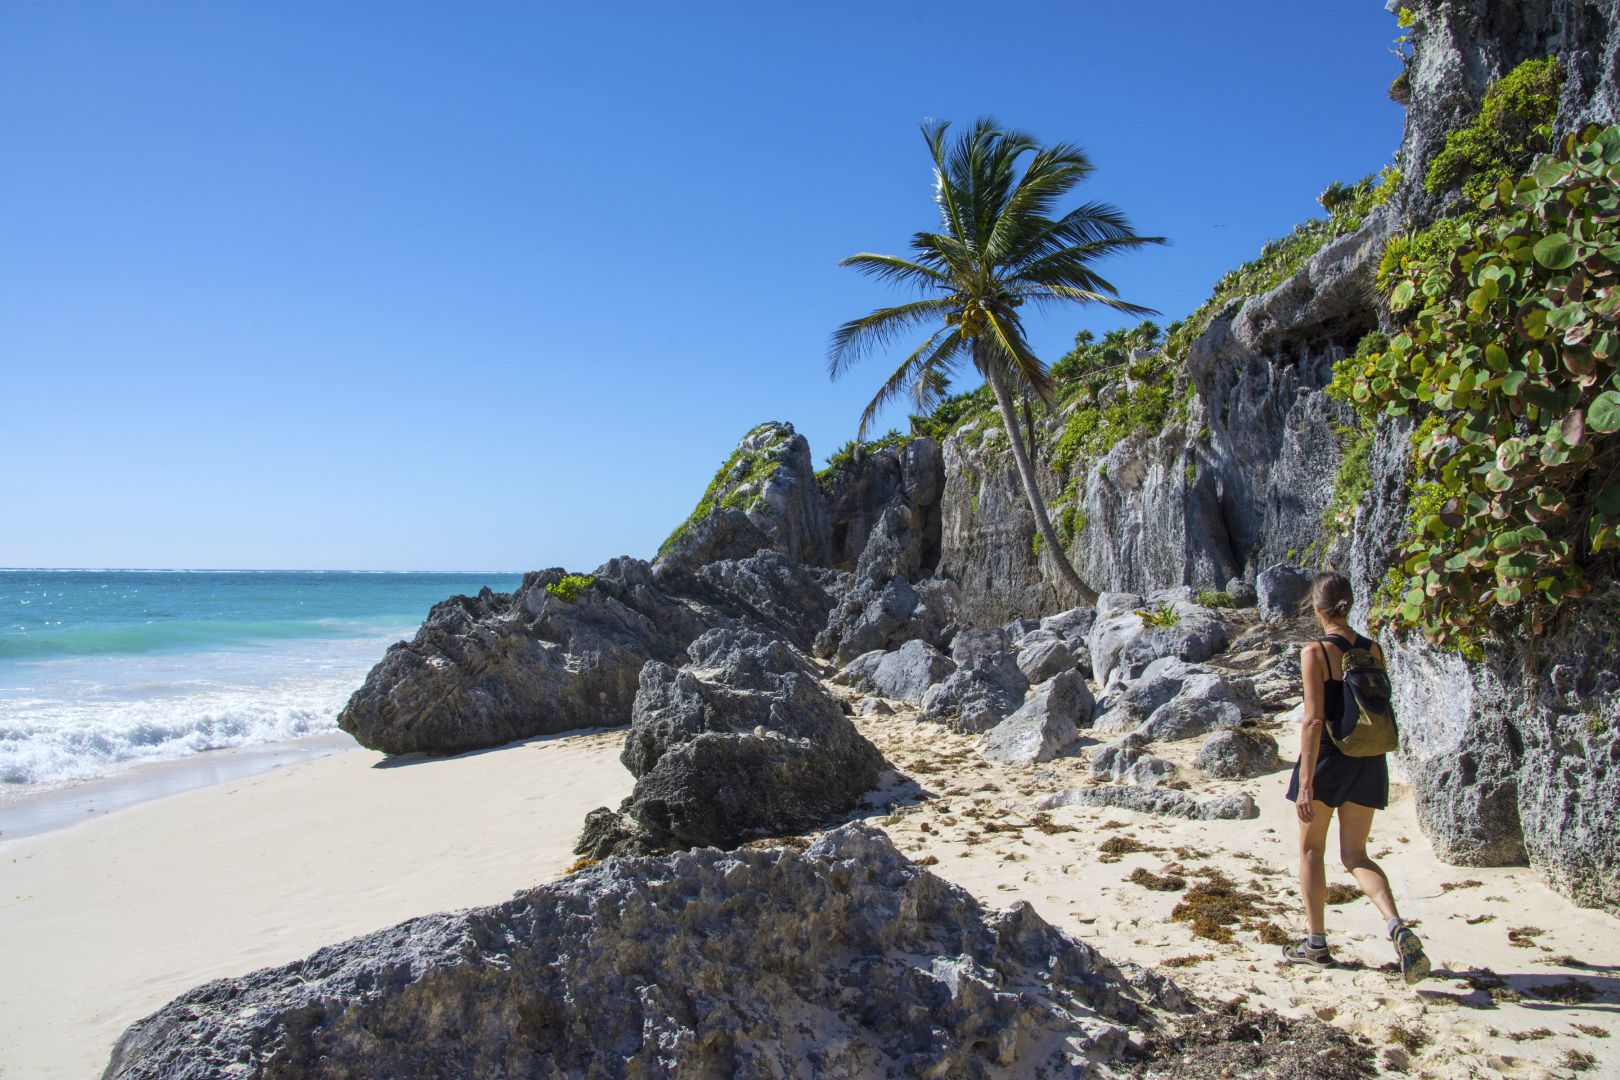 What is Tulum known for?